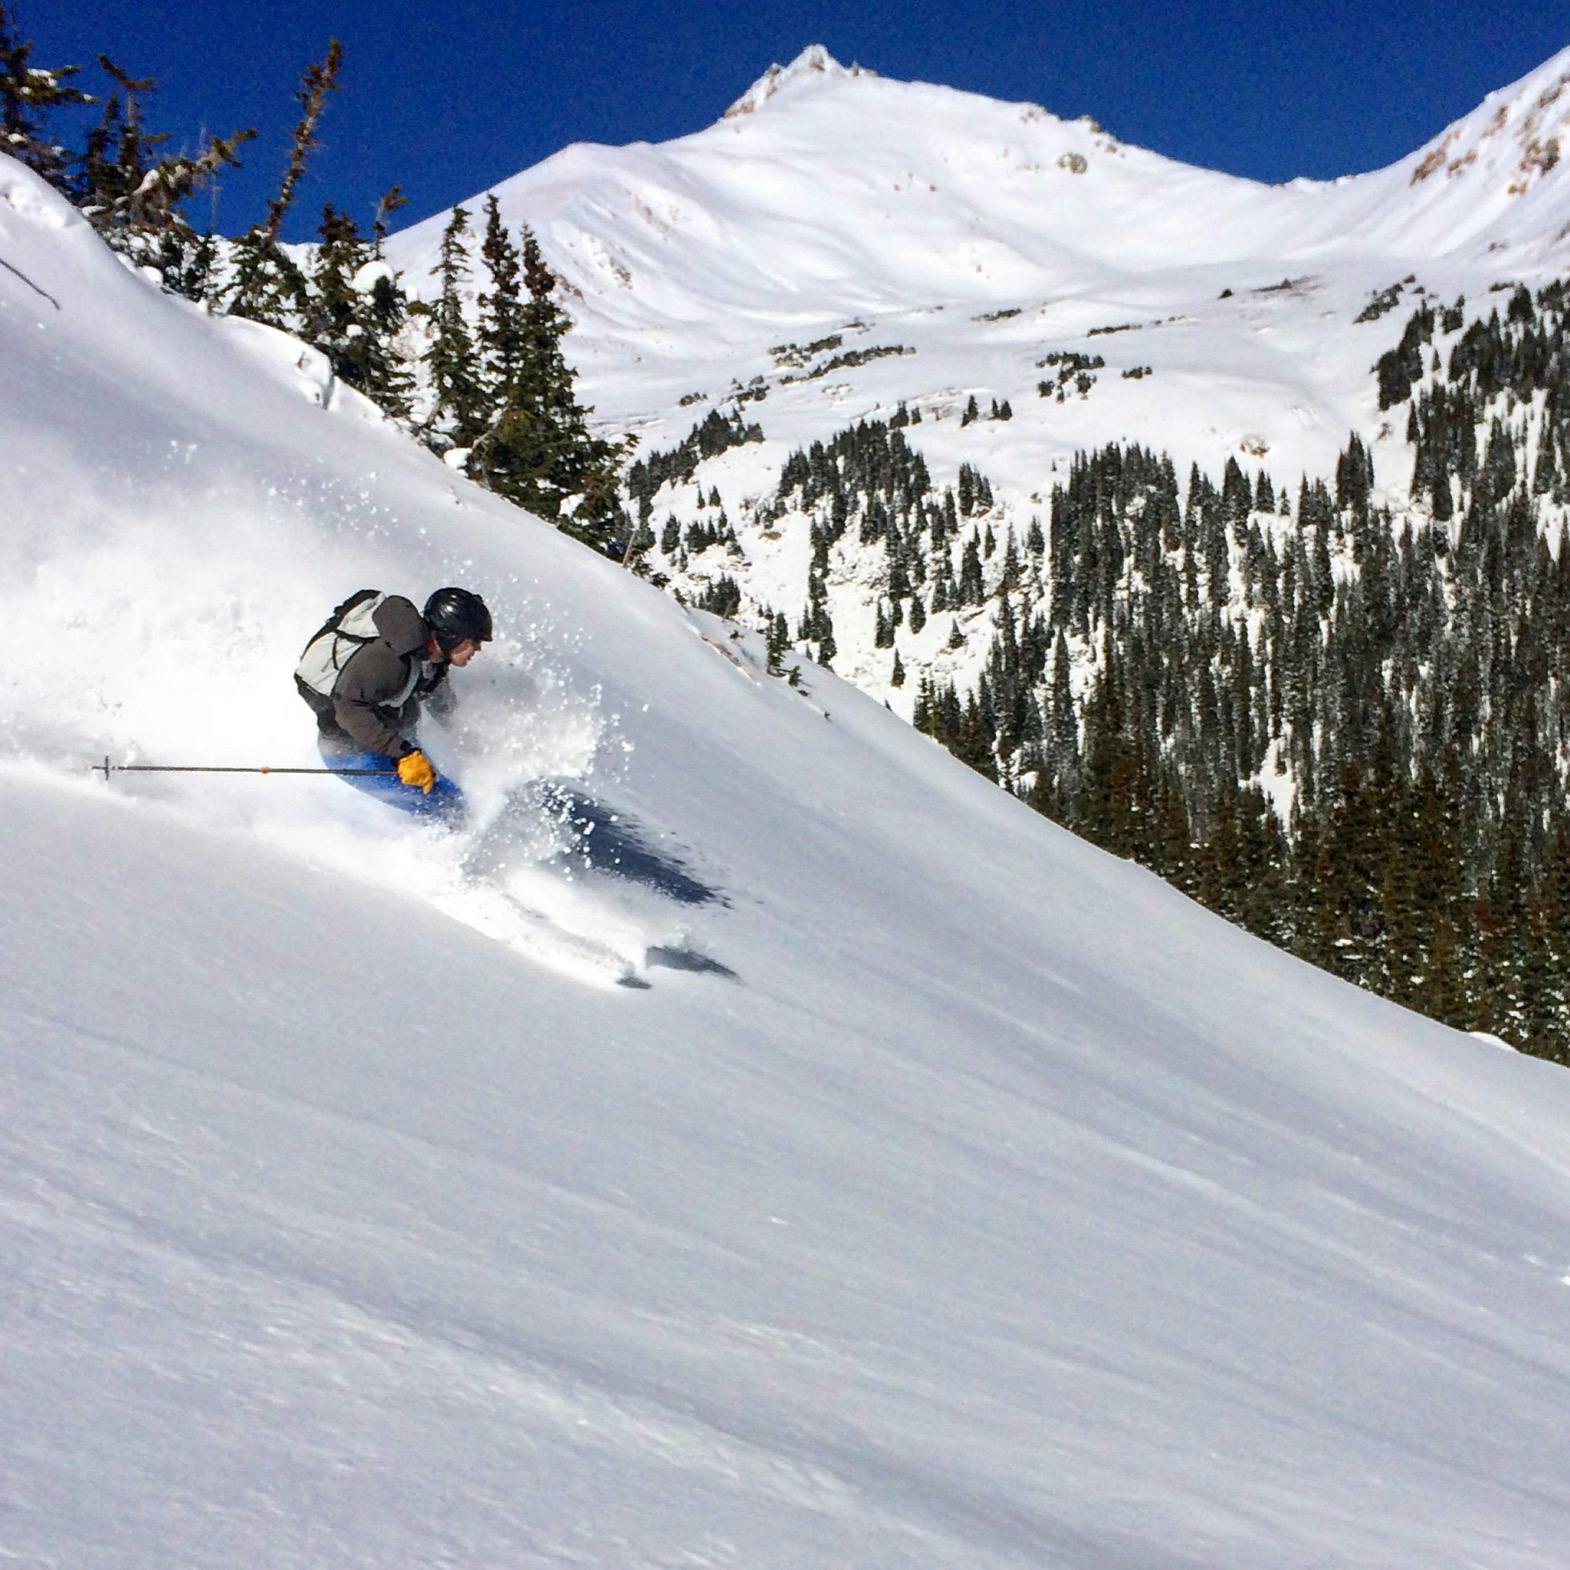 A skier riding down a steep slope in the backcountry